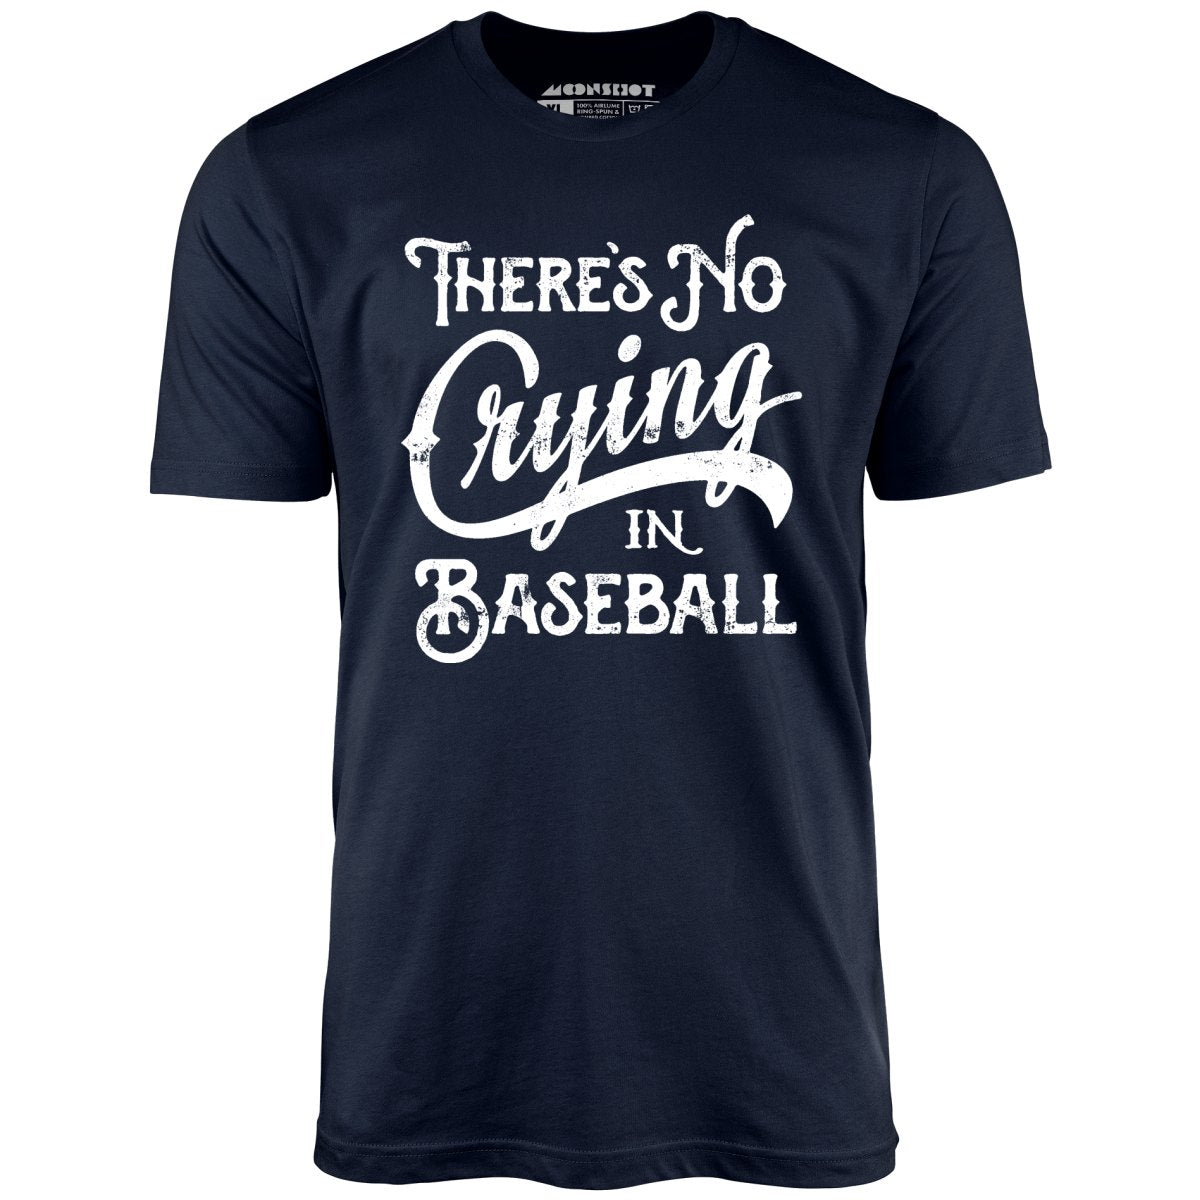 There's No Crying in Baseball - Unisex T-Shirt